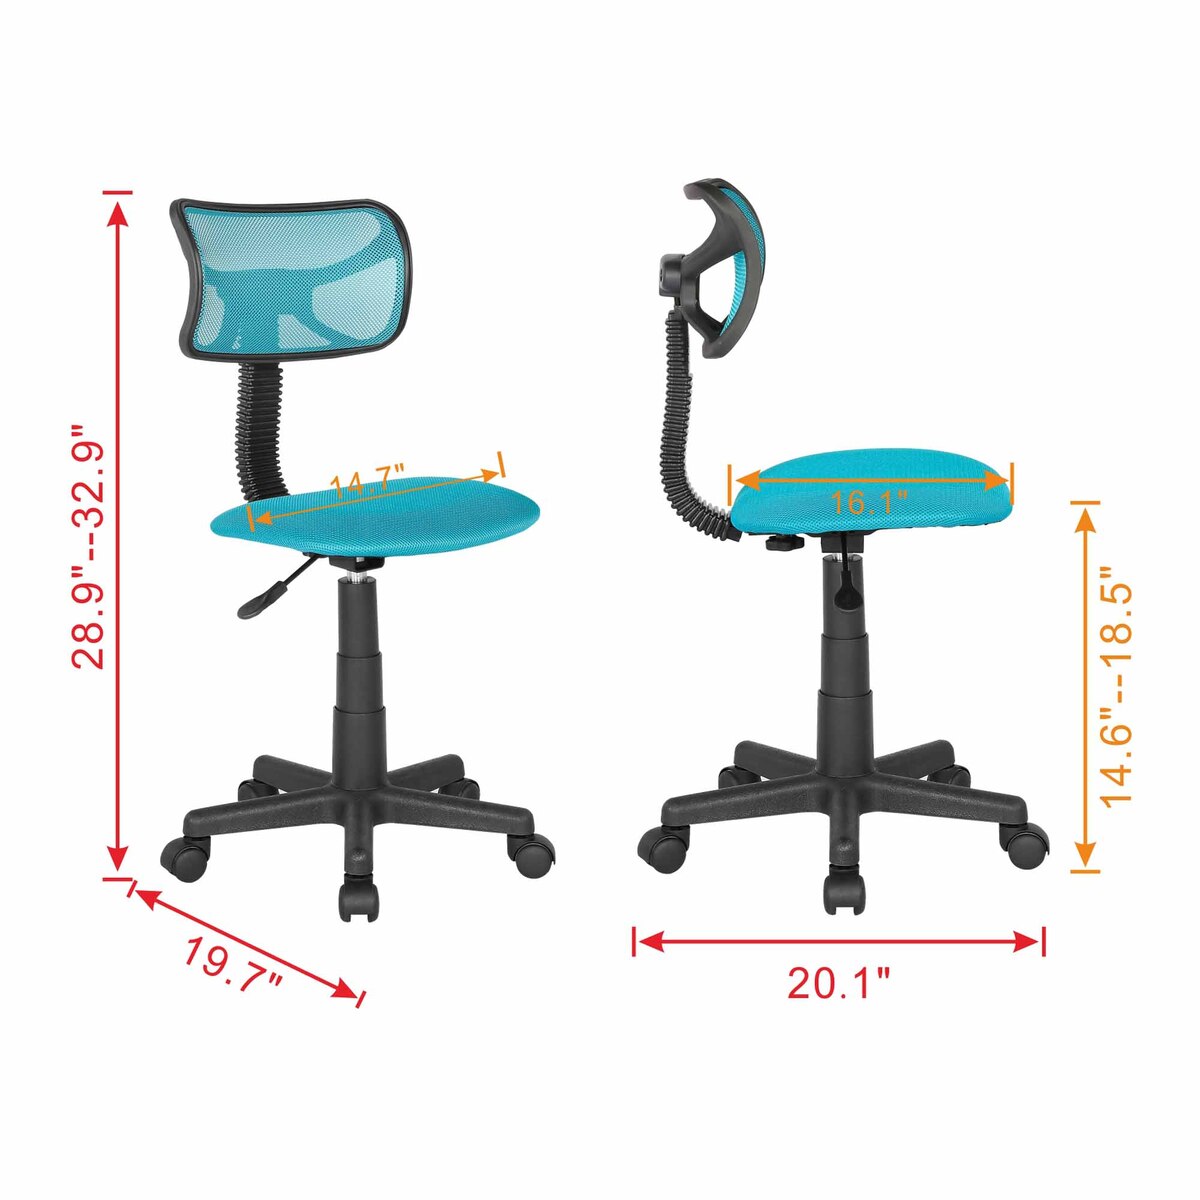 Maple Leaf Adjustable Kids Chair, Office, Computer Chair for Students With Swivel Wheels Wild and free WK656641